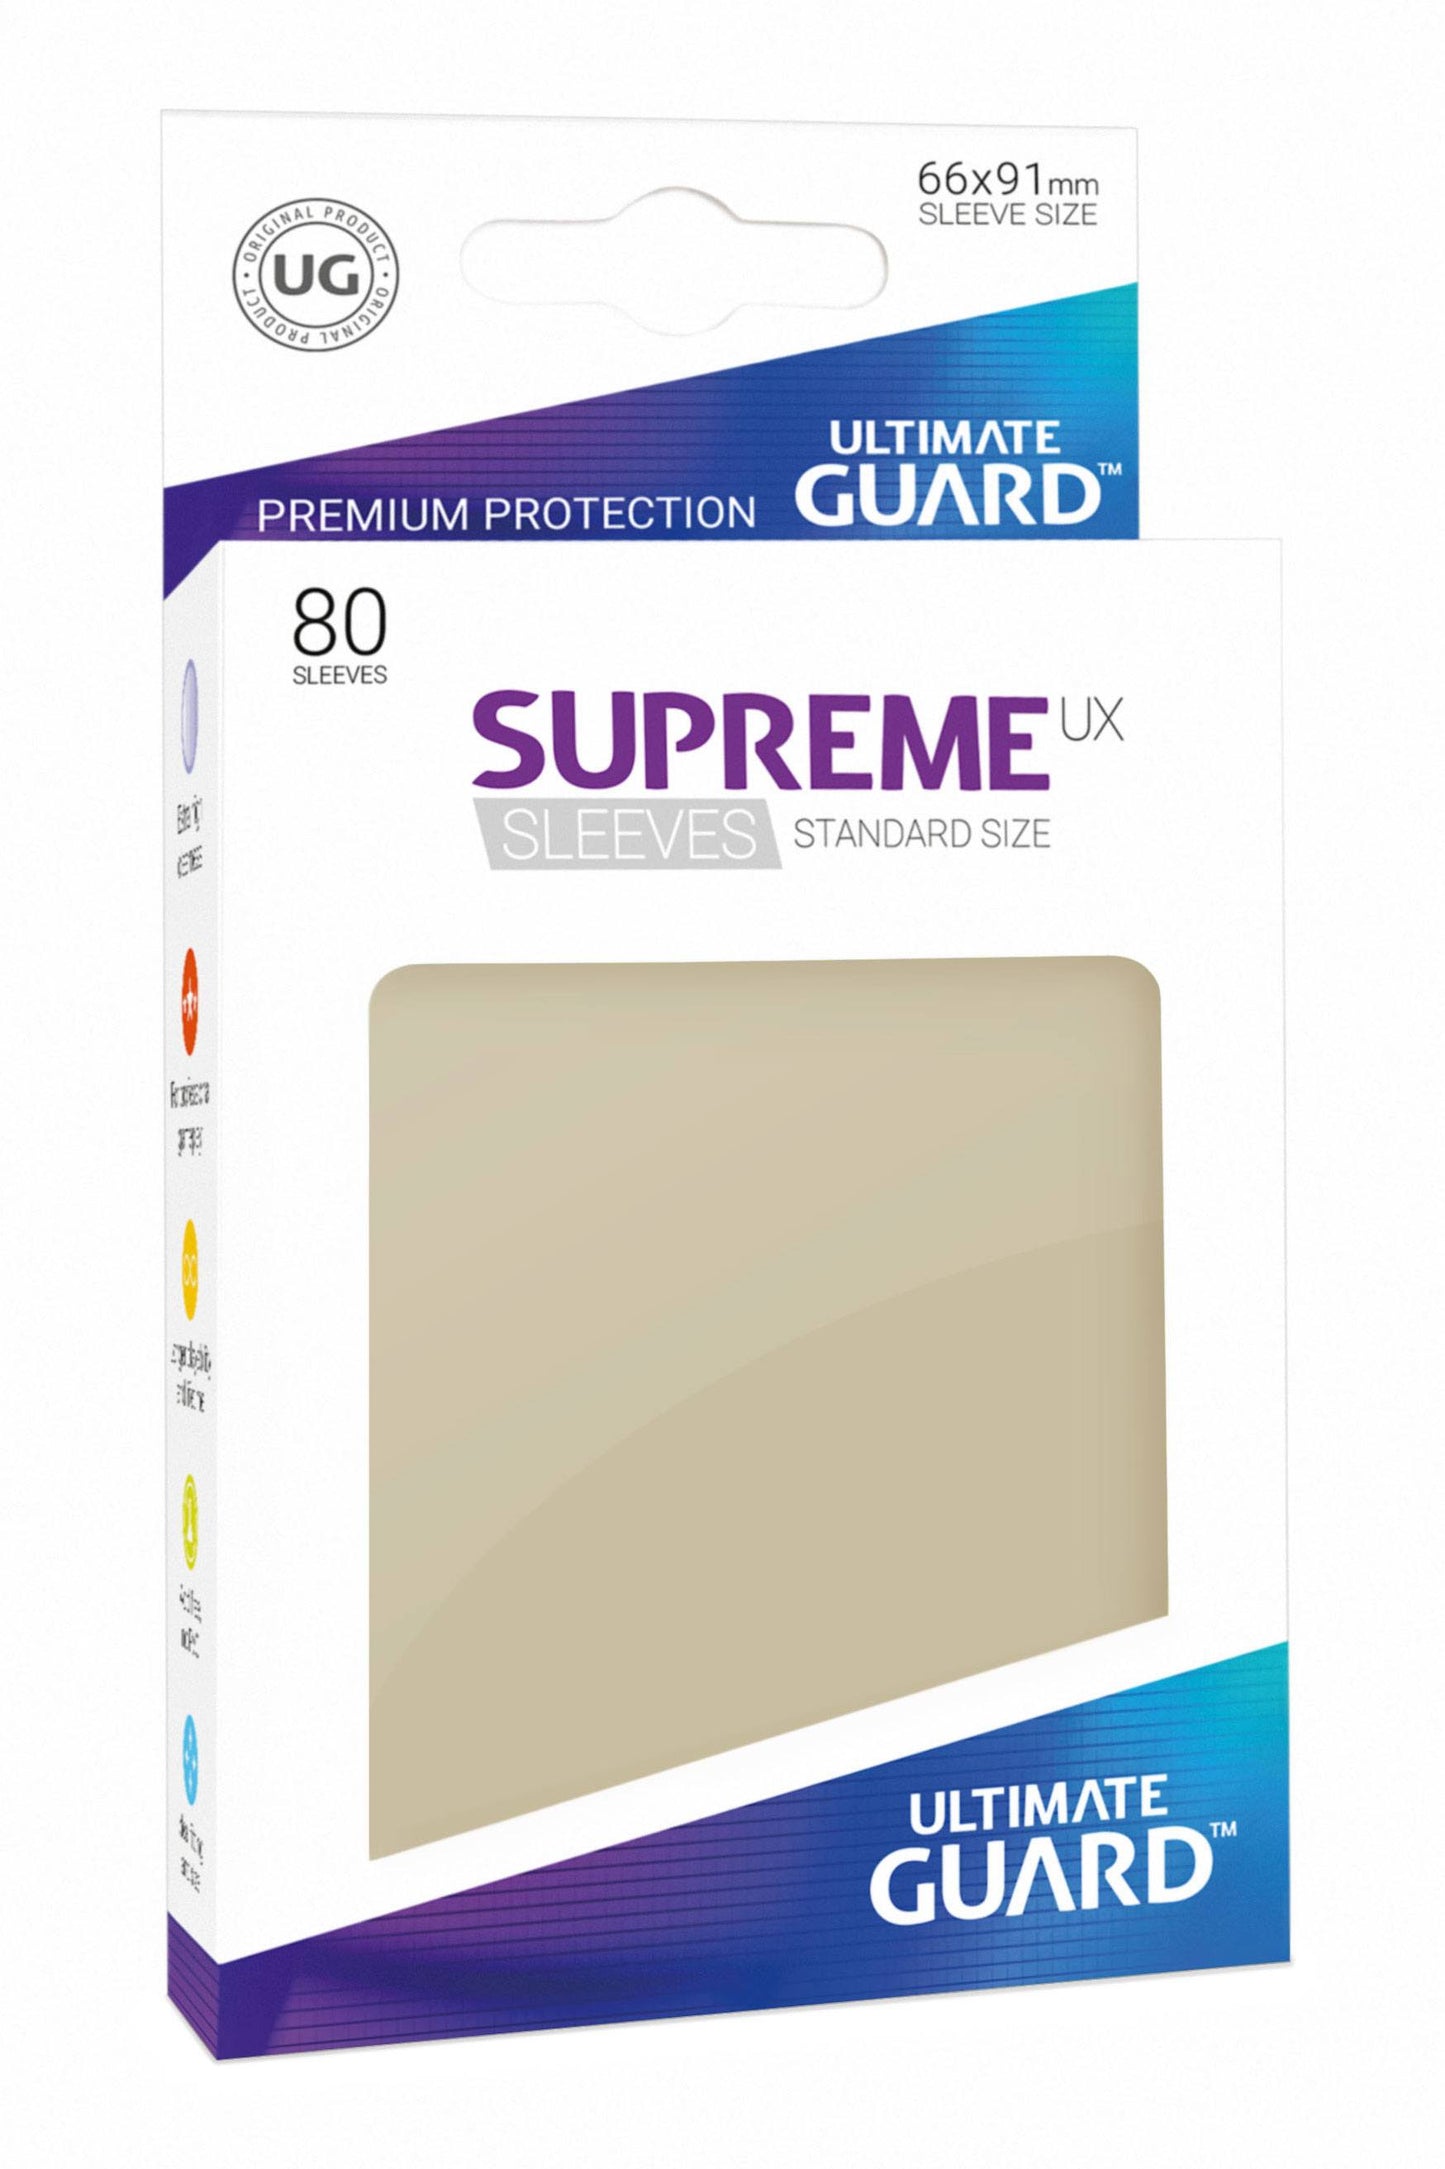 Ultimate Guard - Supreme UX Sleeves - Standard Size (80)